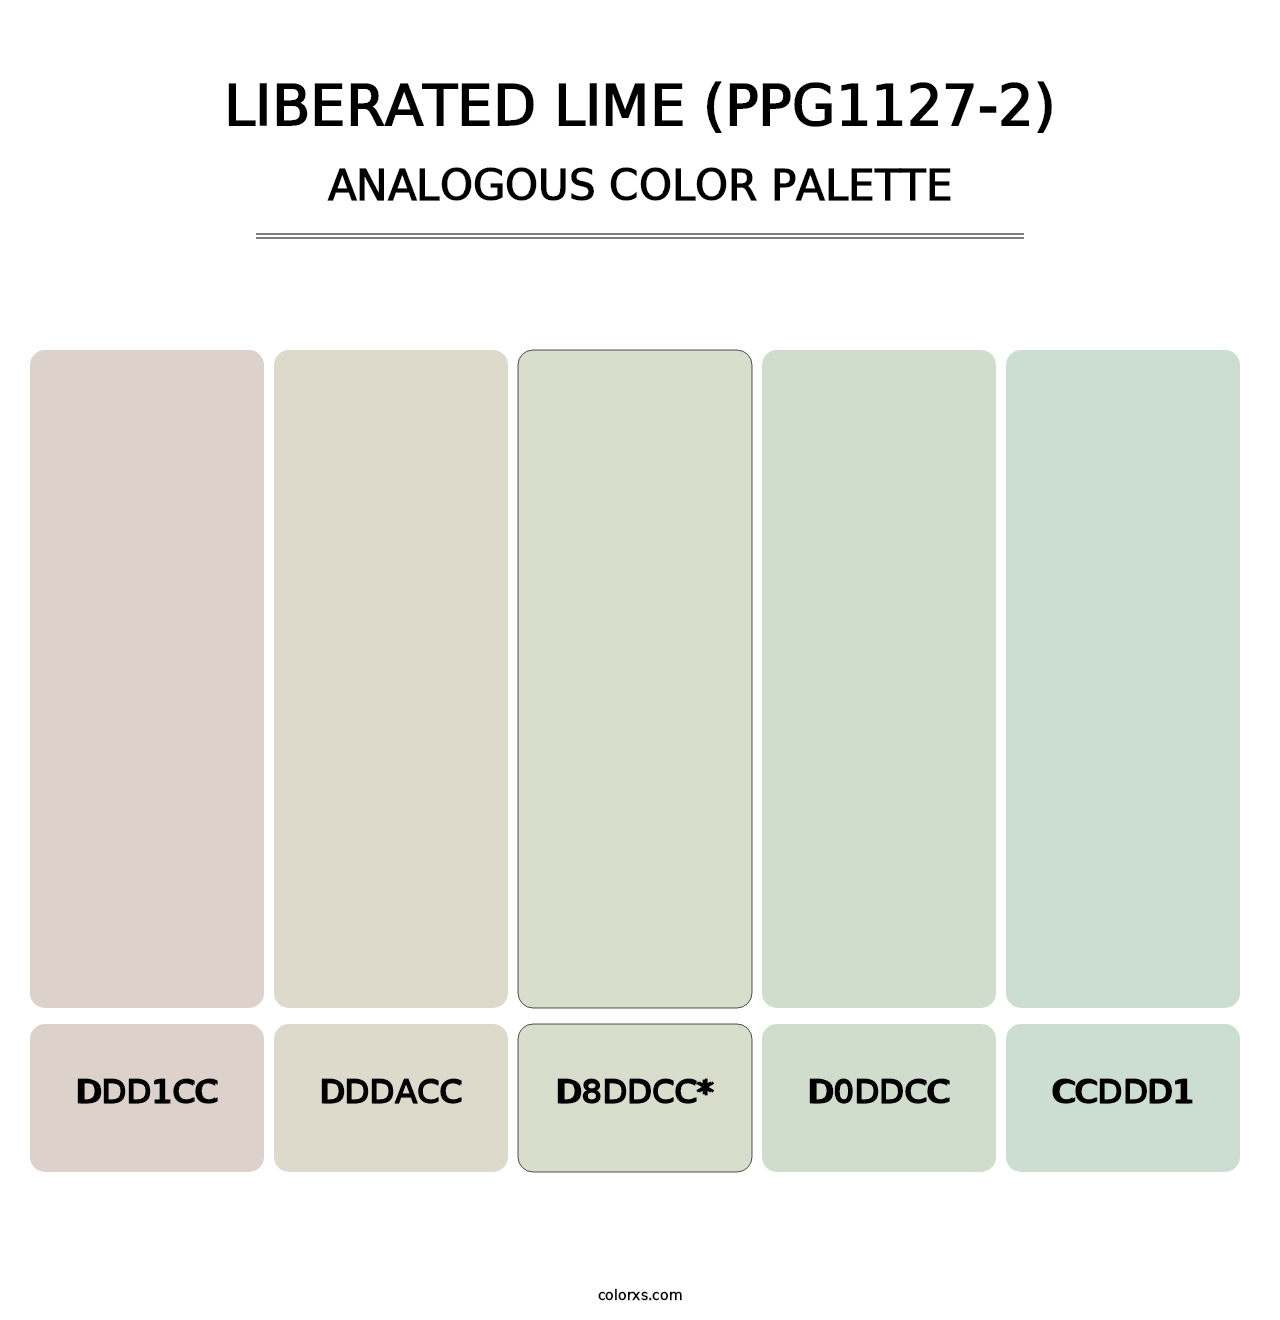 Liberated Lime (PPG1127-2) - Analogous Color Palette